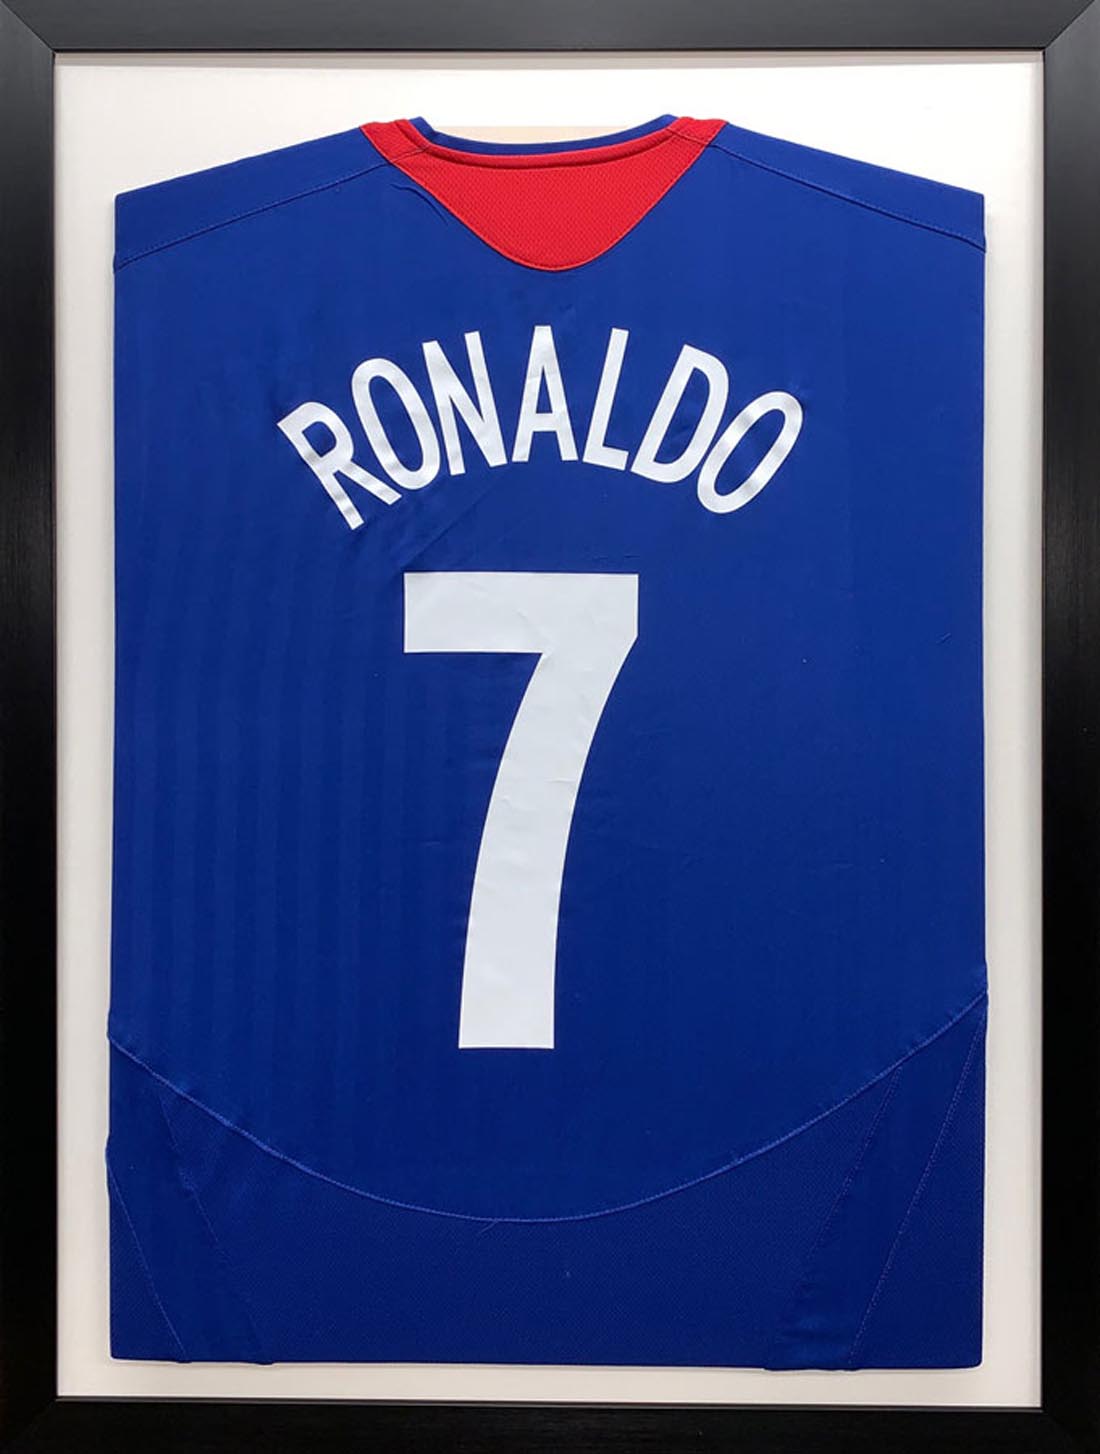 best size jersey to frame